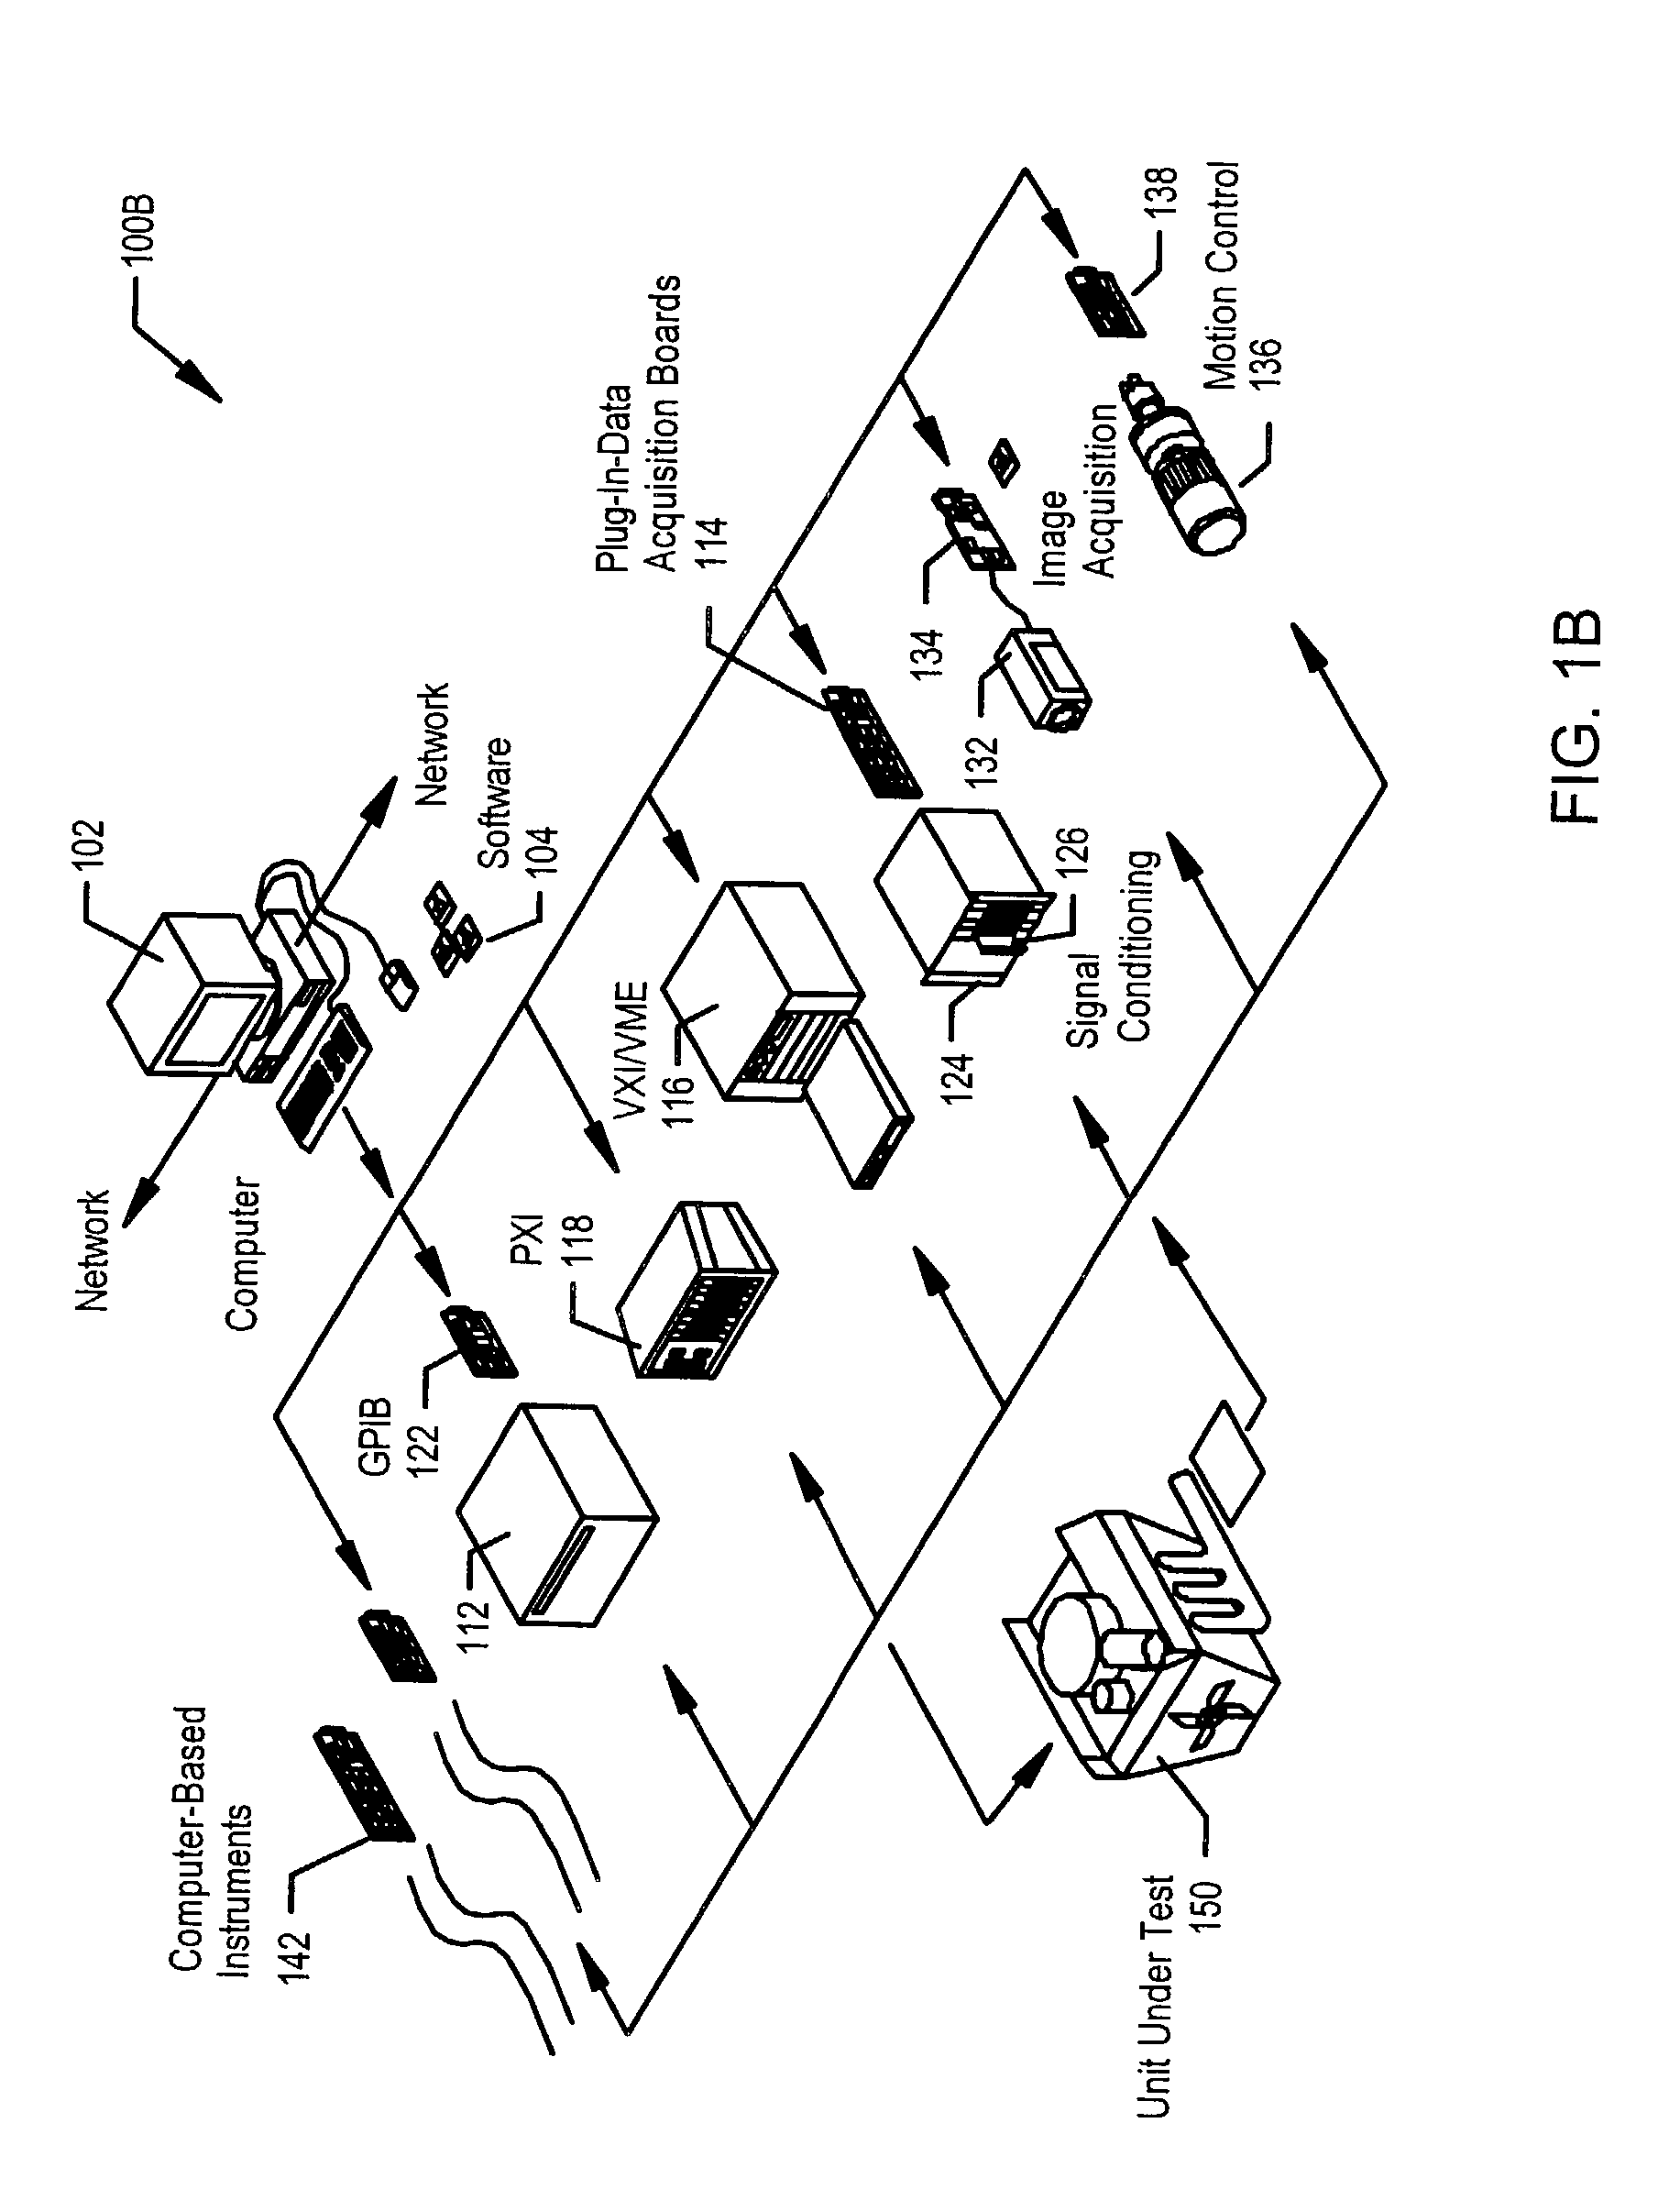 Dynamic routing for a measurement system